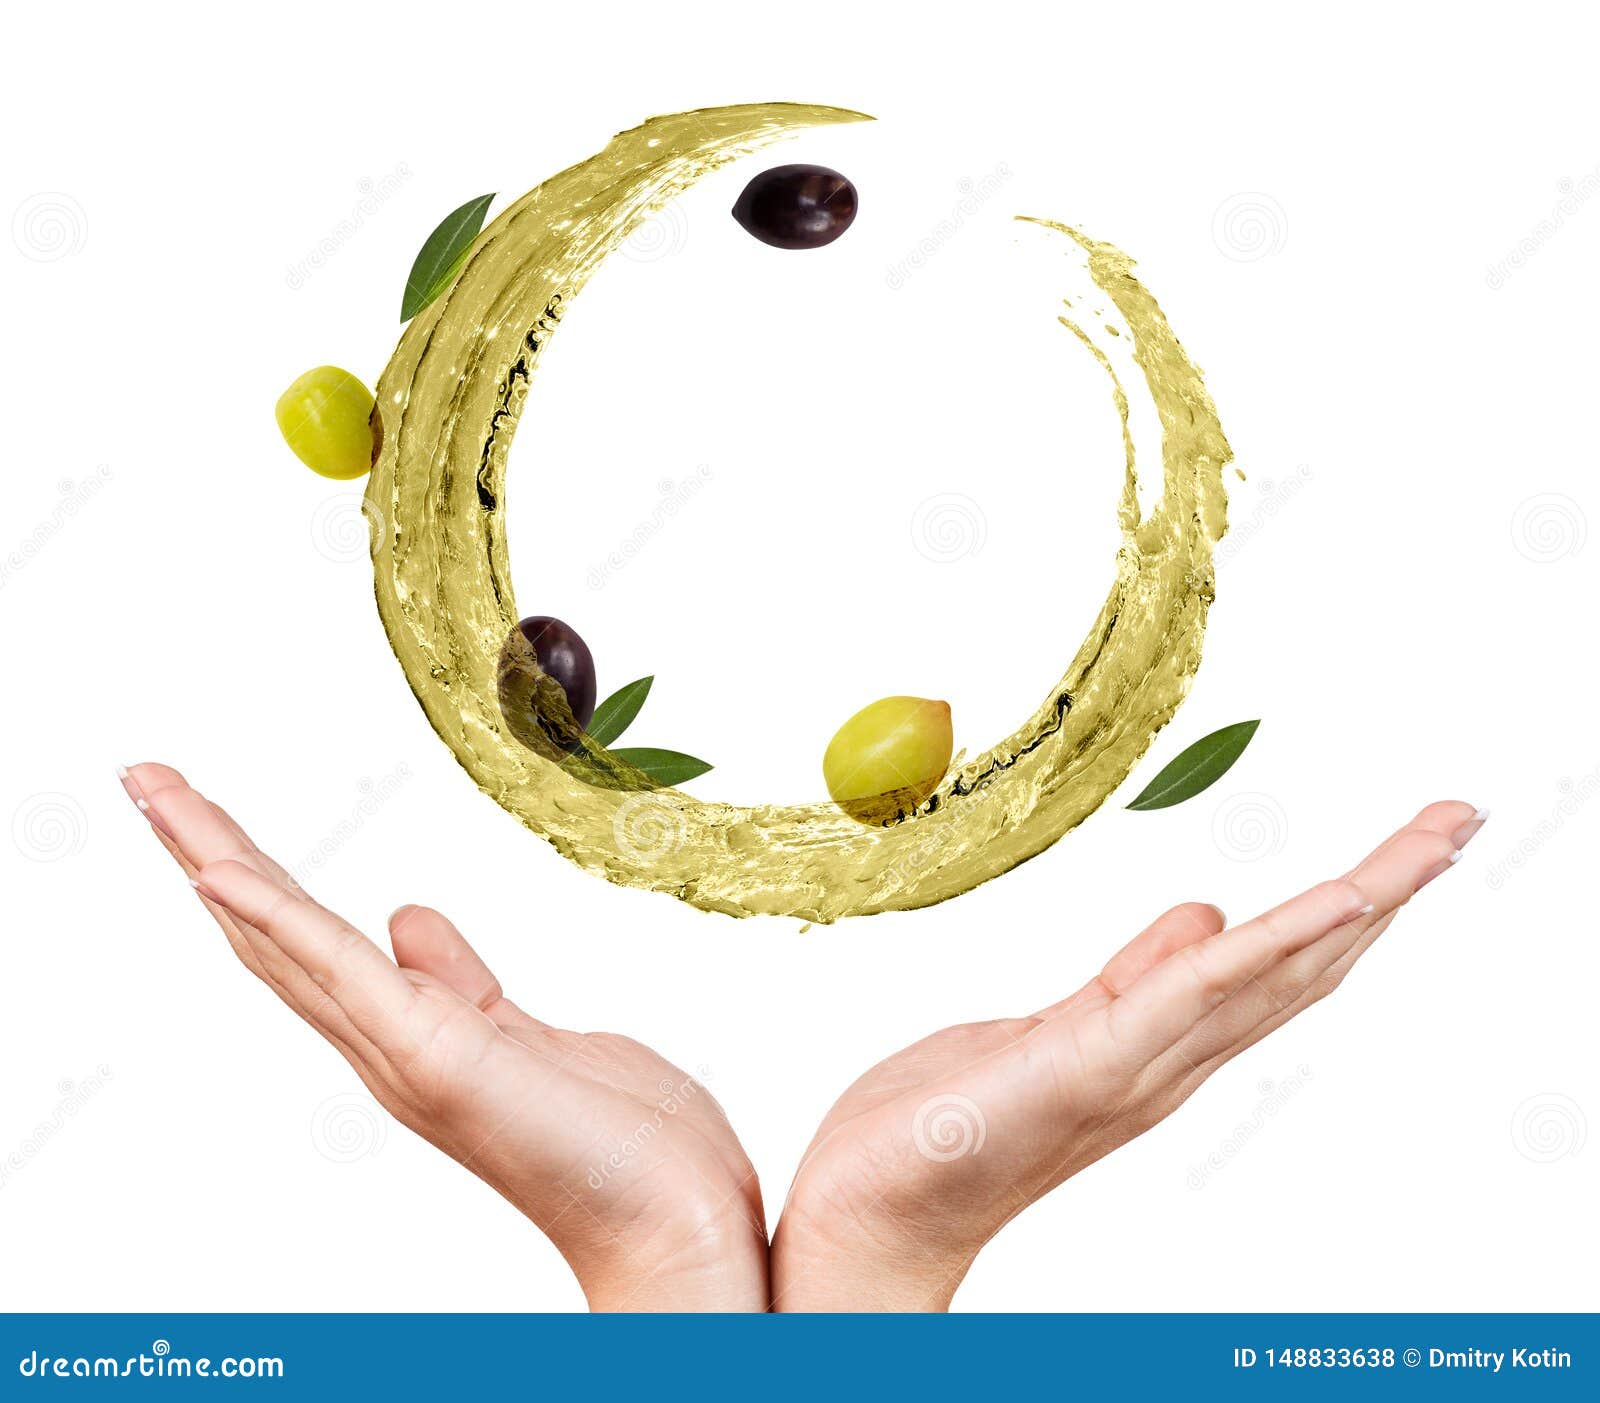 circulate splash of olive oil with olives in female hands.